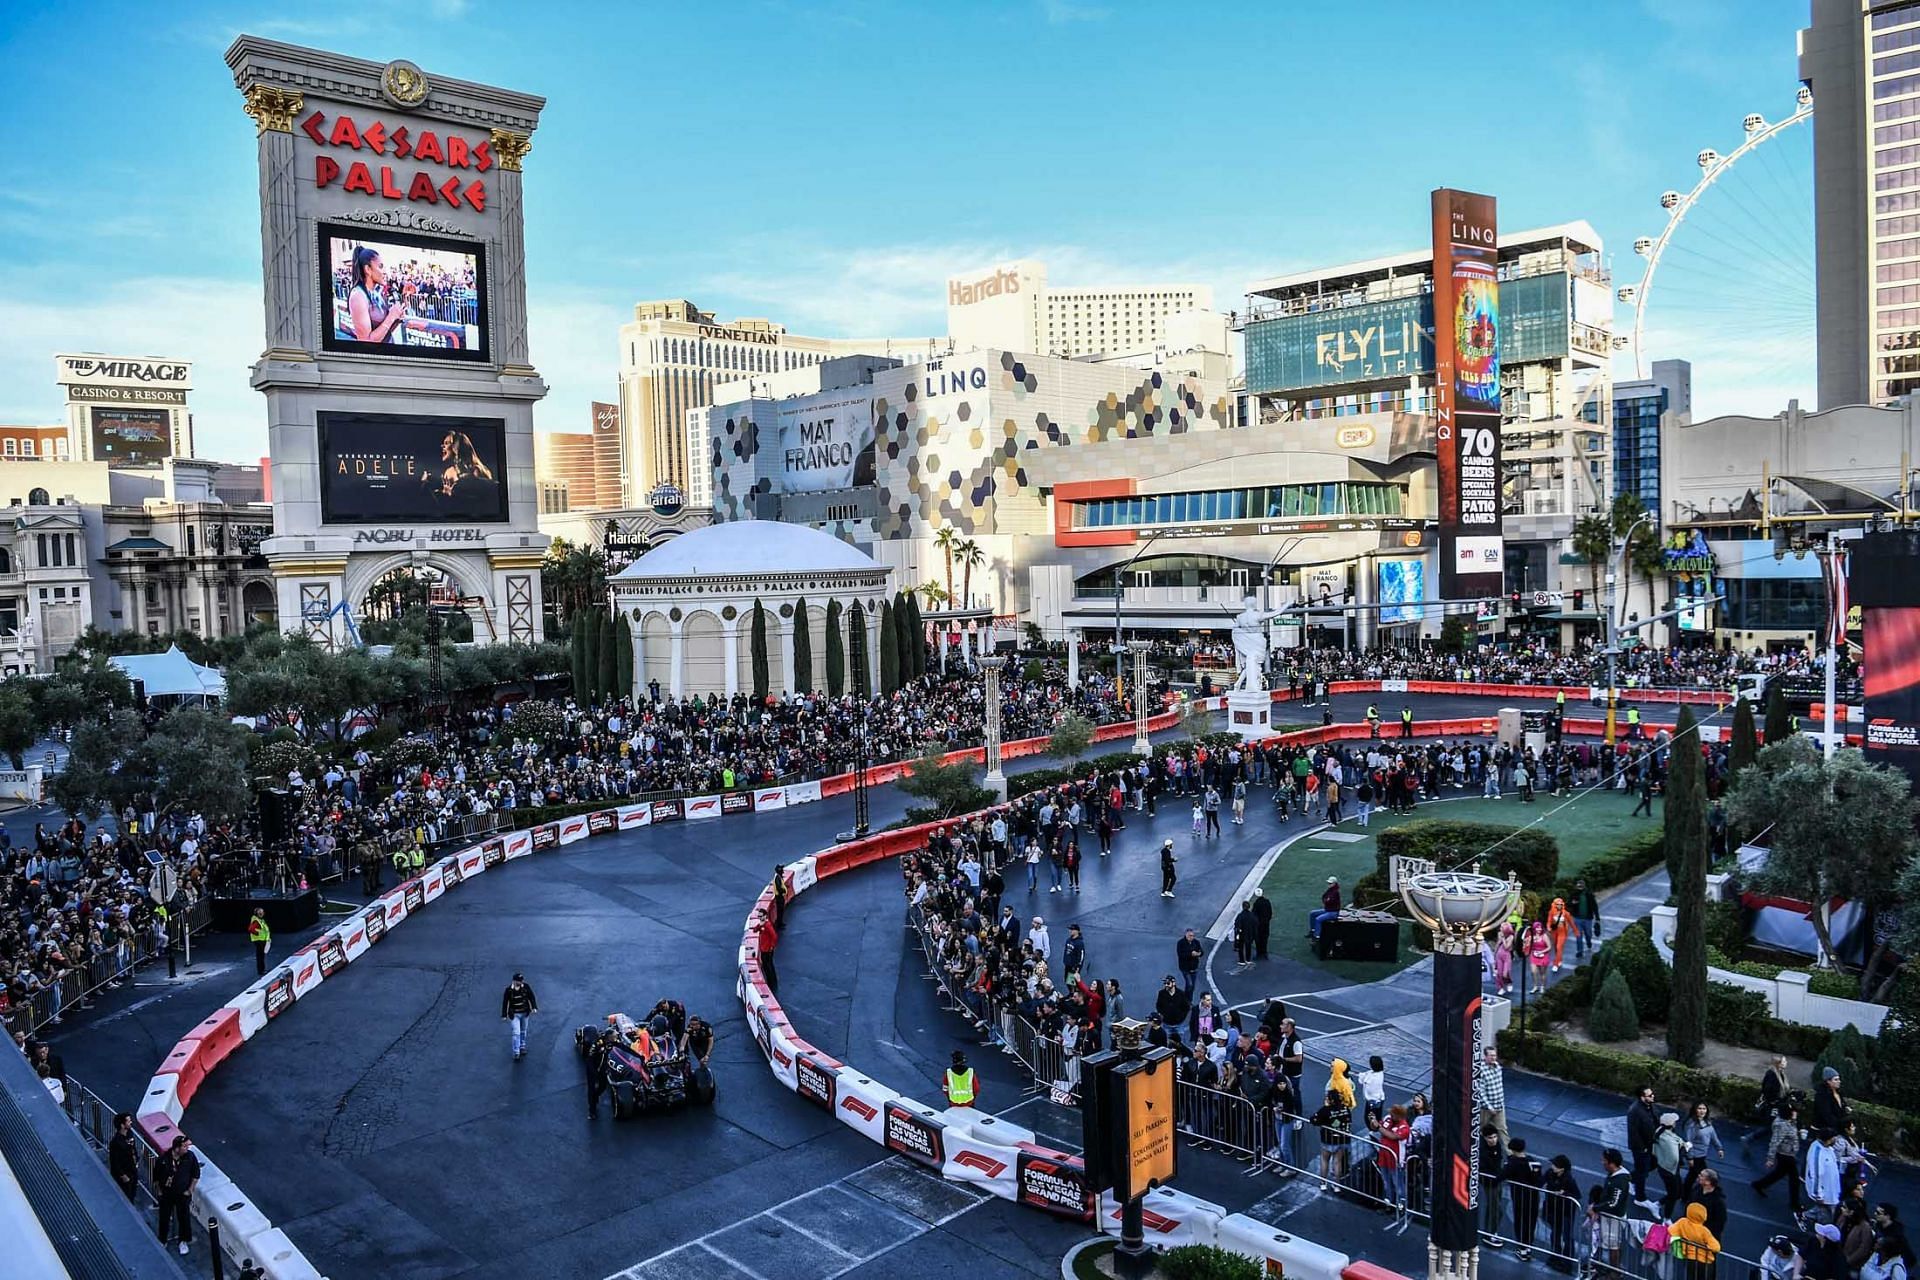 F1 could help Las Vegas to become the car capital of the U.S